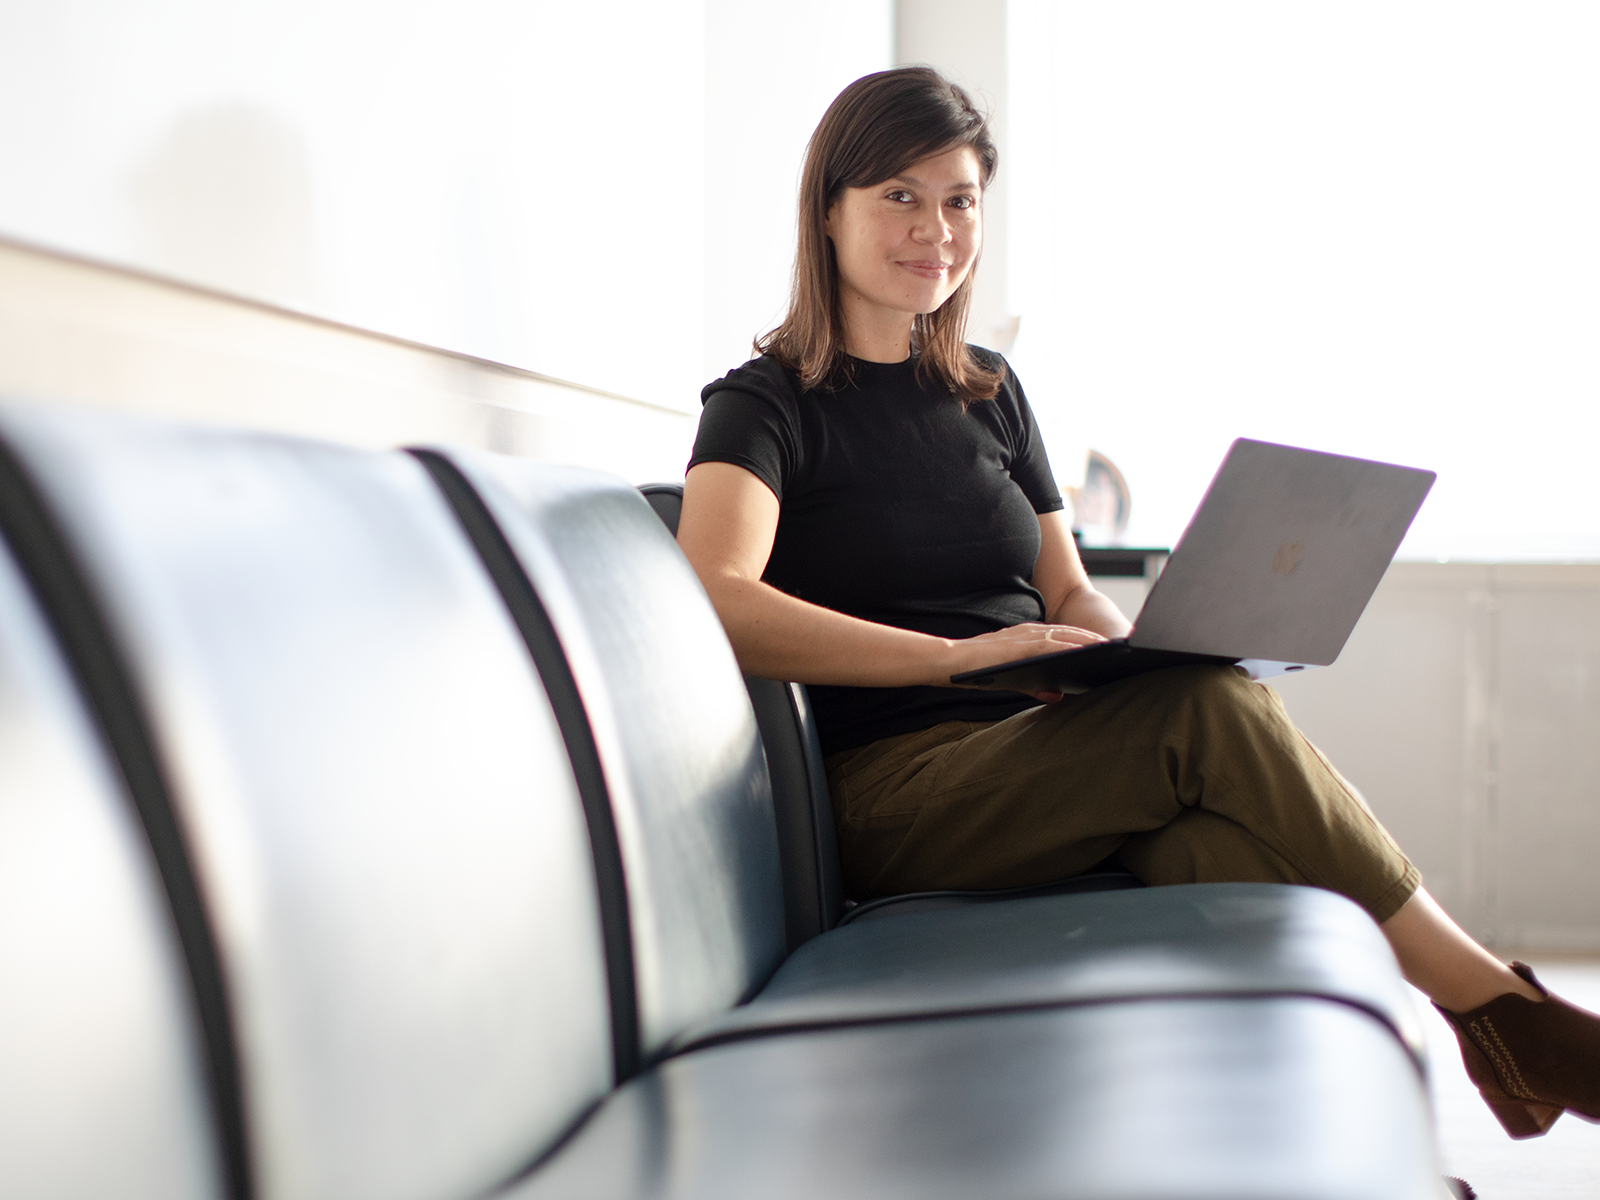 Woman in profile sitting on a bench with a laptop on her knee facing the camera.